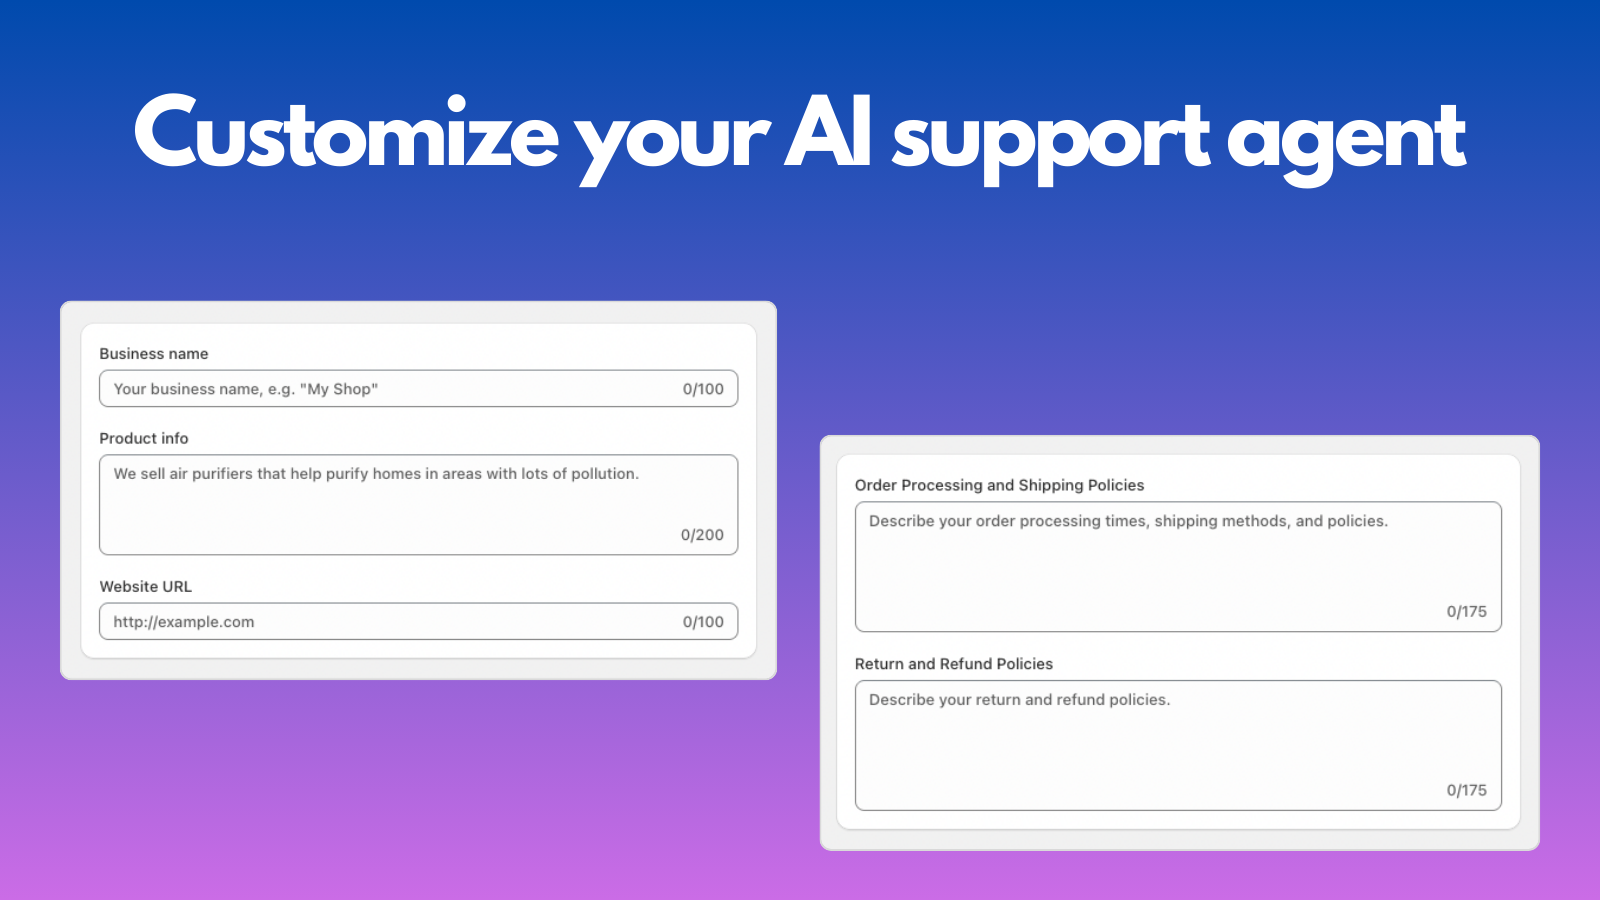 Customize your AI support agent